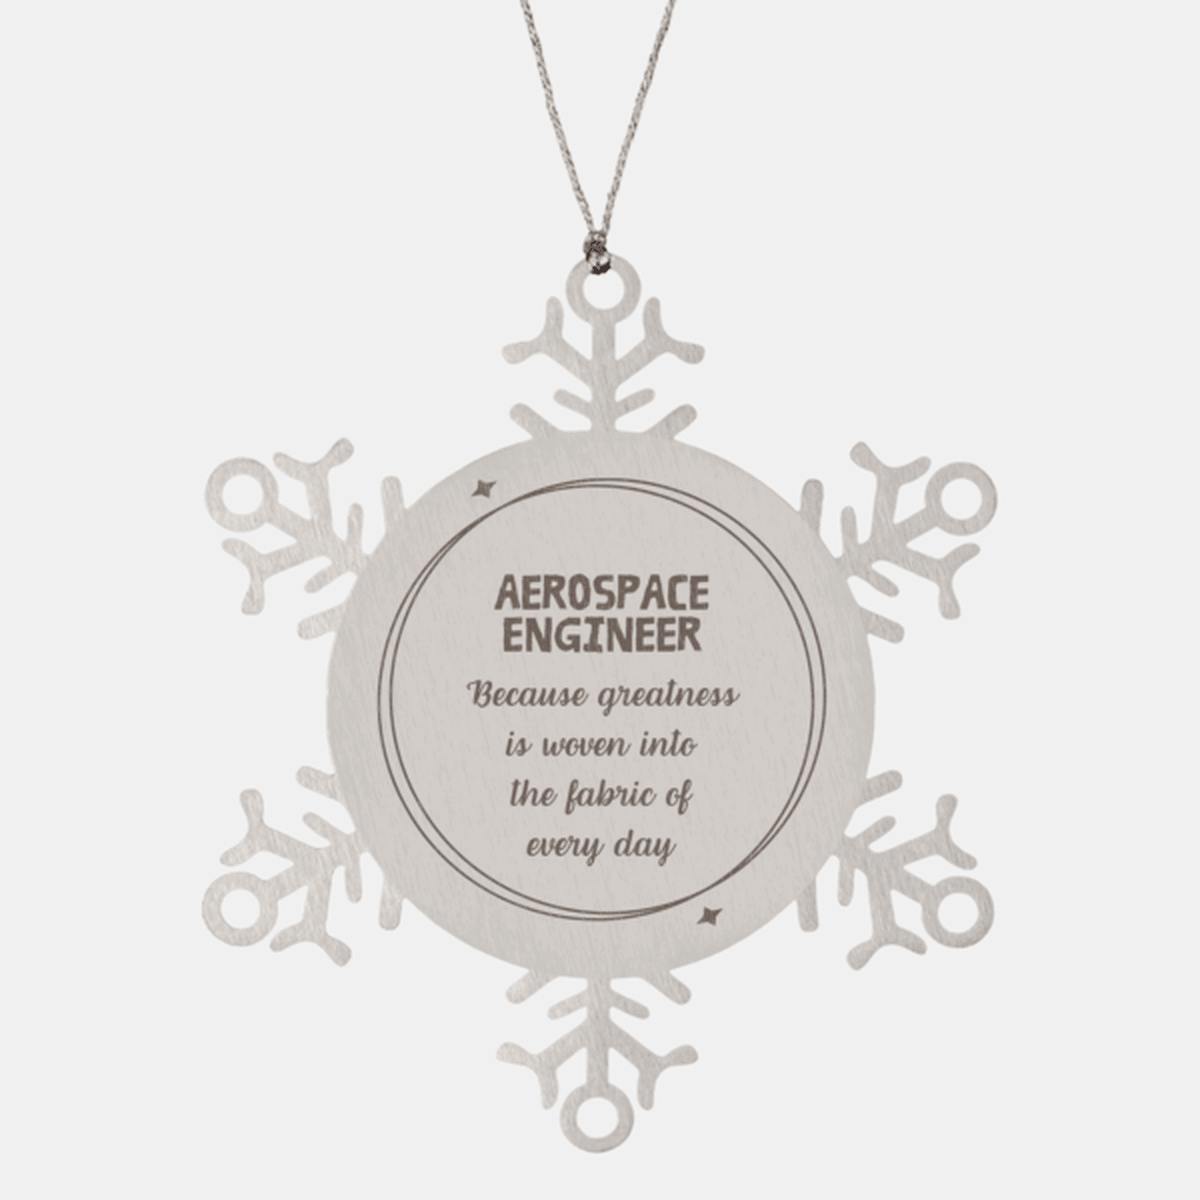 Sarcastic Aerospace Engineer Snowflake Ornament Gifts, Christmas Holiday Gifts for Aerospace Engineer Ornament, Aerospace Engineer: Because greatness is woven into the fabric of every day, Coworkers, Friends - Mallard Moon Gift Shop